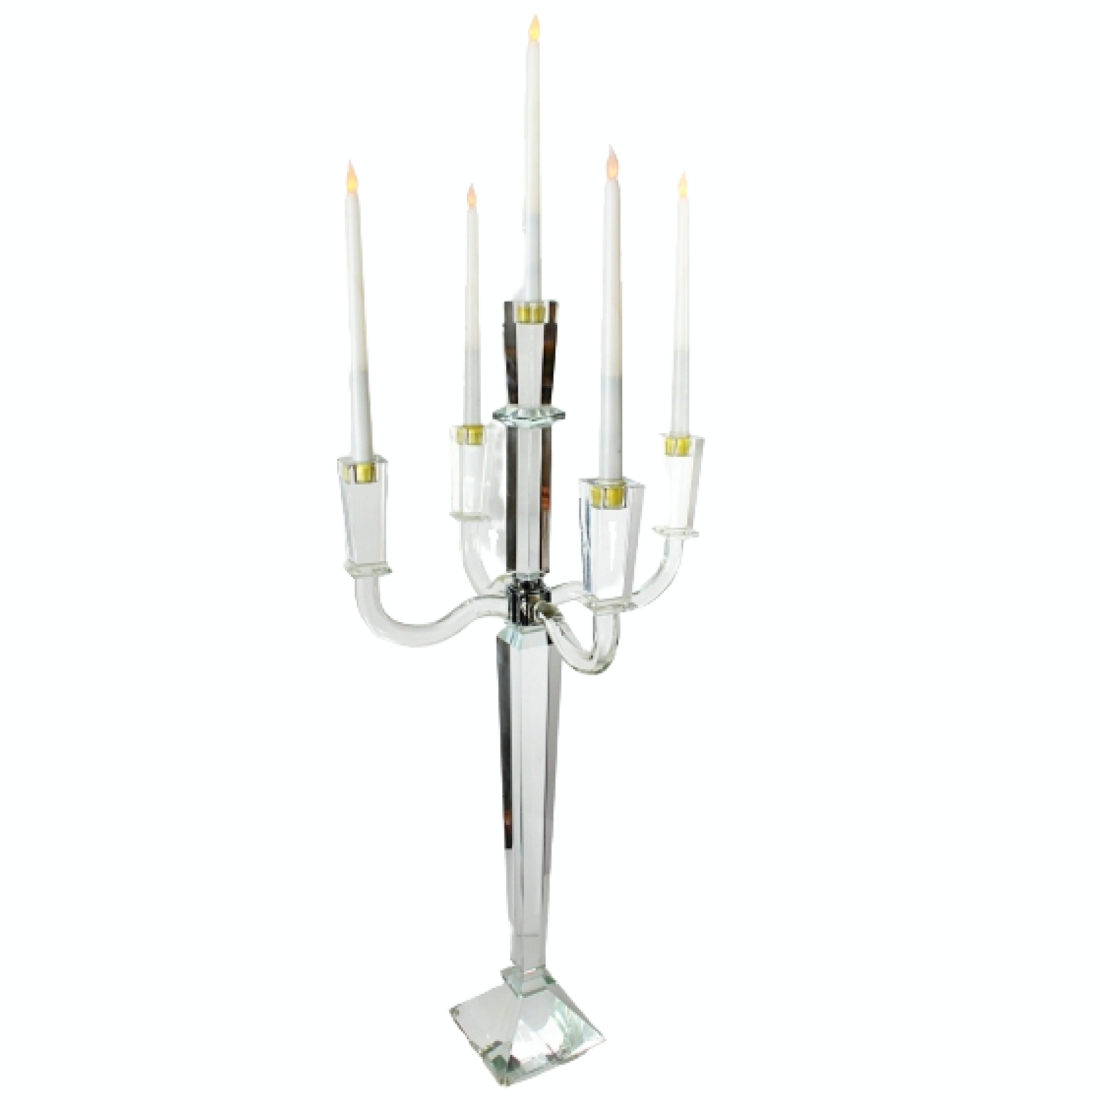 Crystal Candelabra with 5 arms, 5 led candles